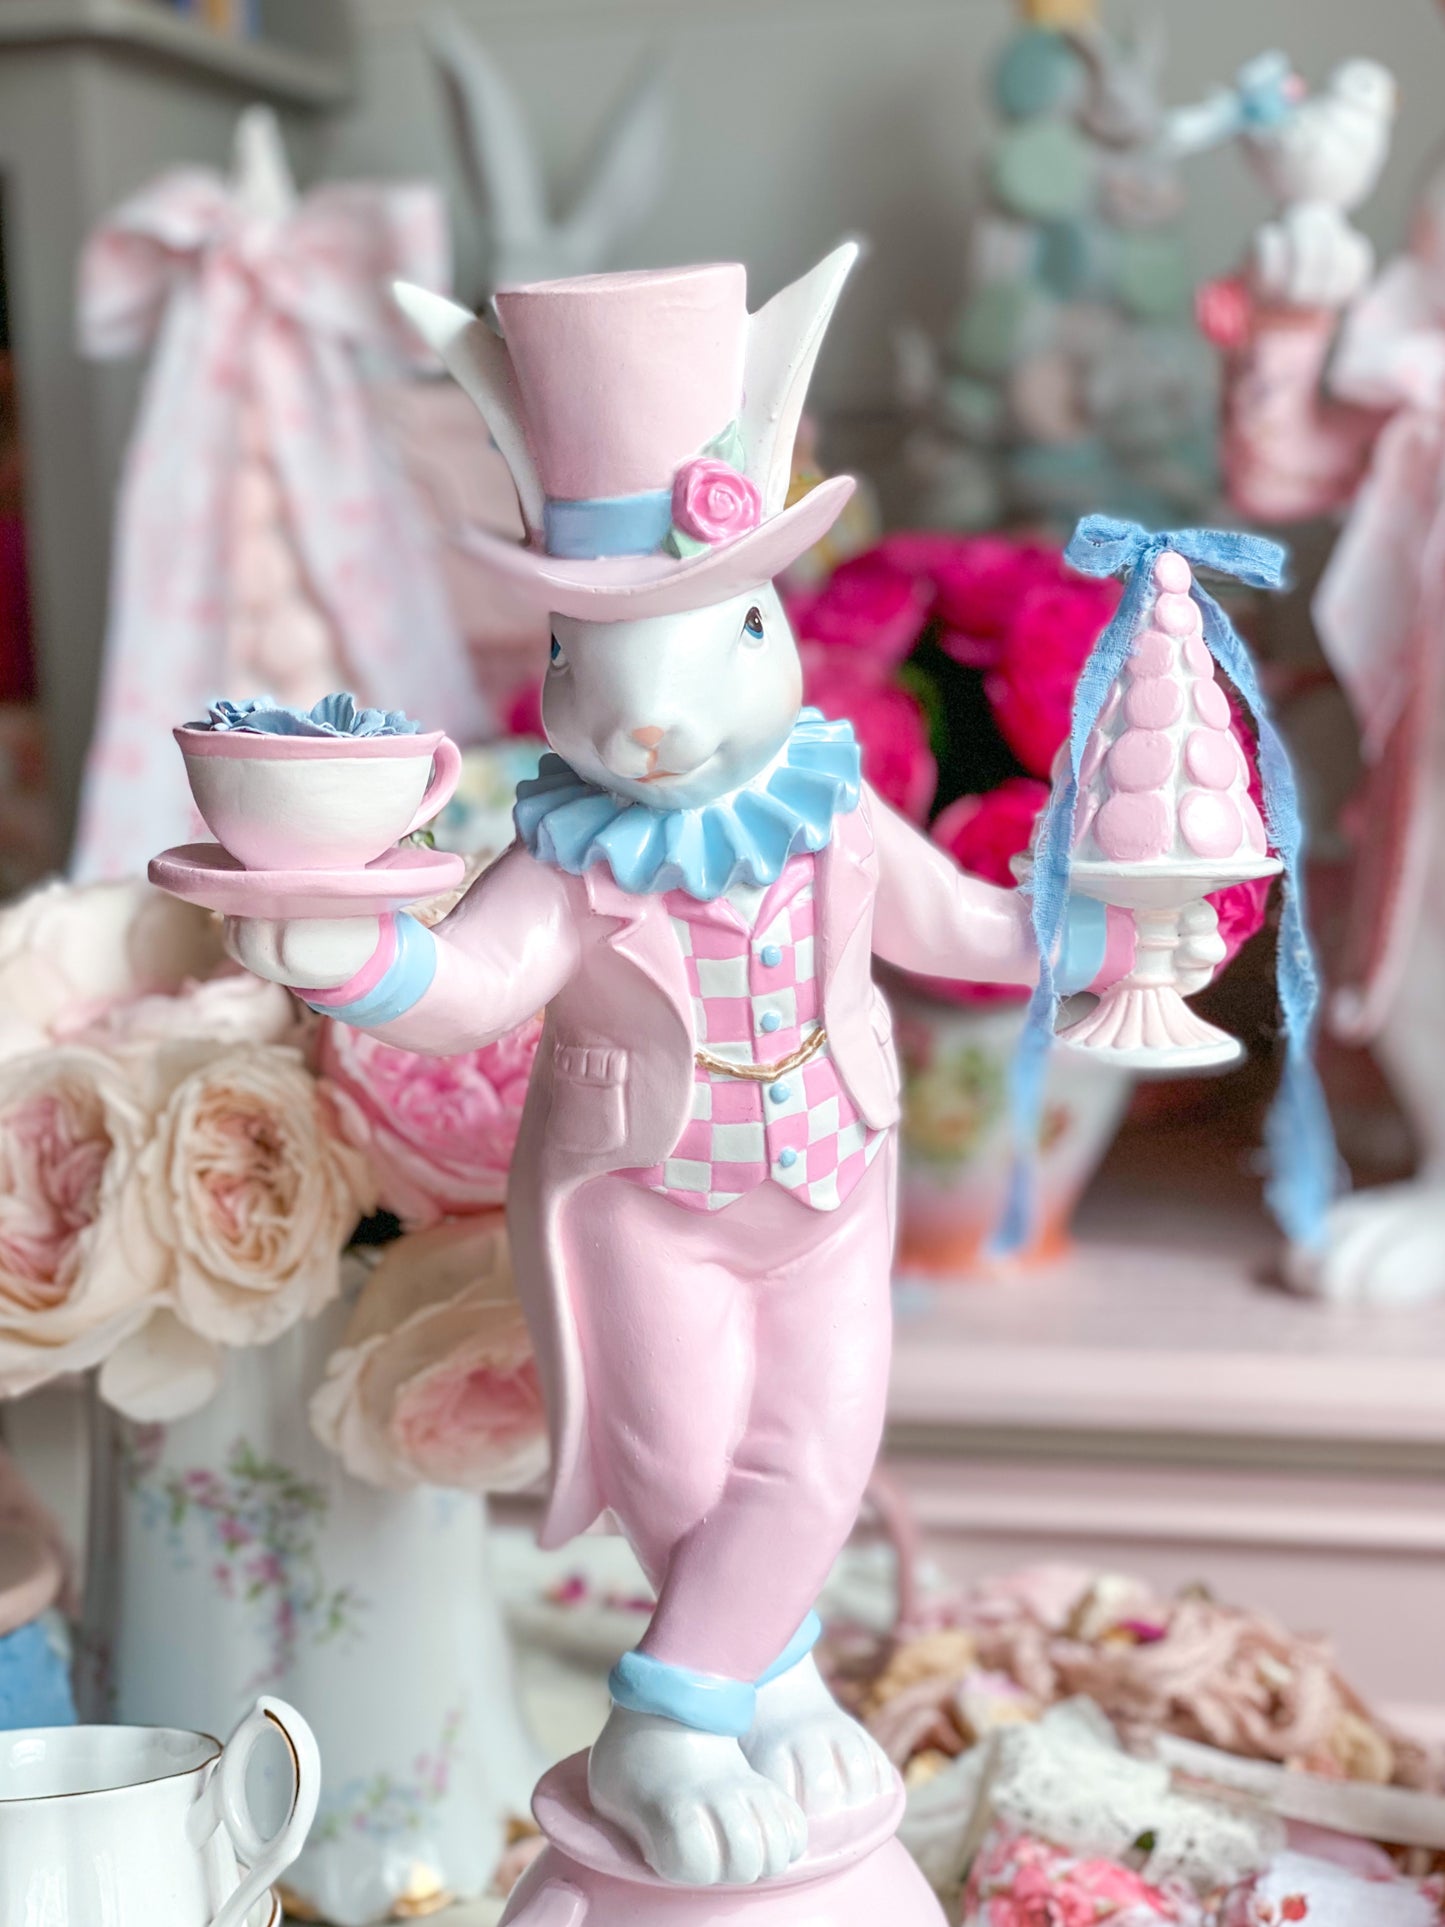 GLOW-UP Commission: Bespoke Hand Painted Pastel Pink and Blue Mad Hatter Bunny Balancing on a Tea Cup